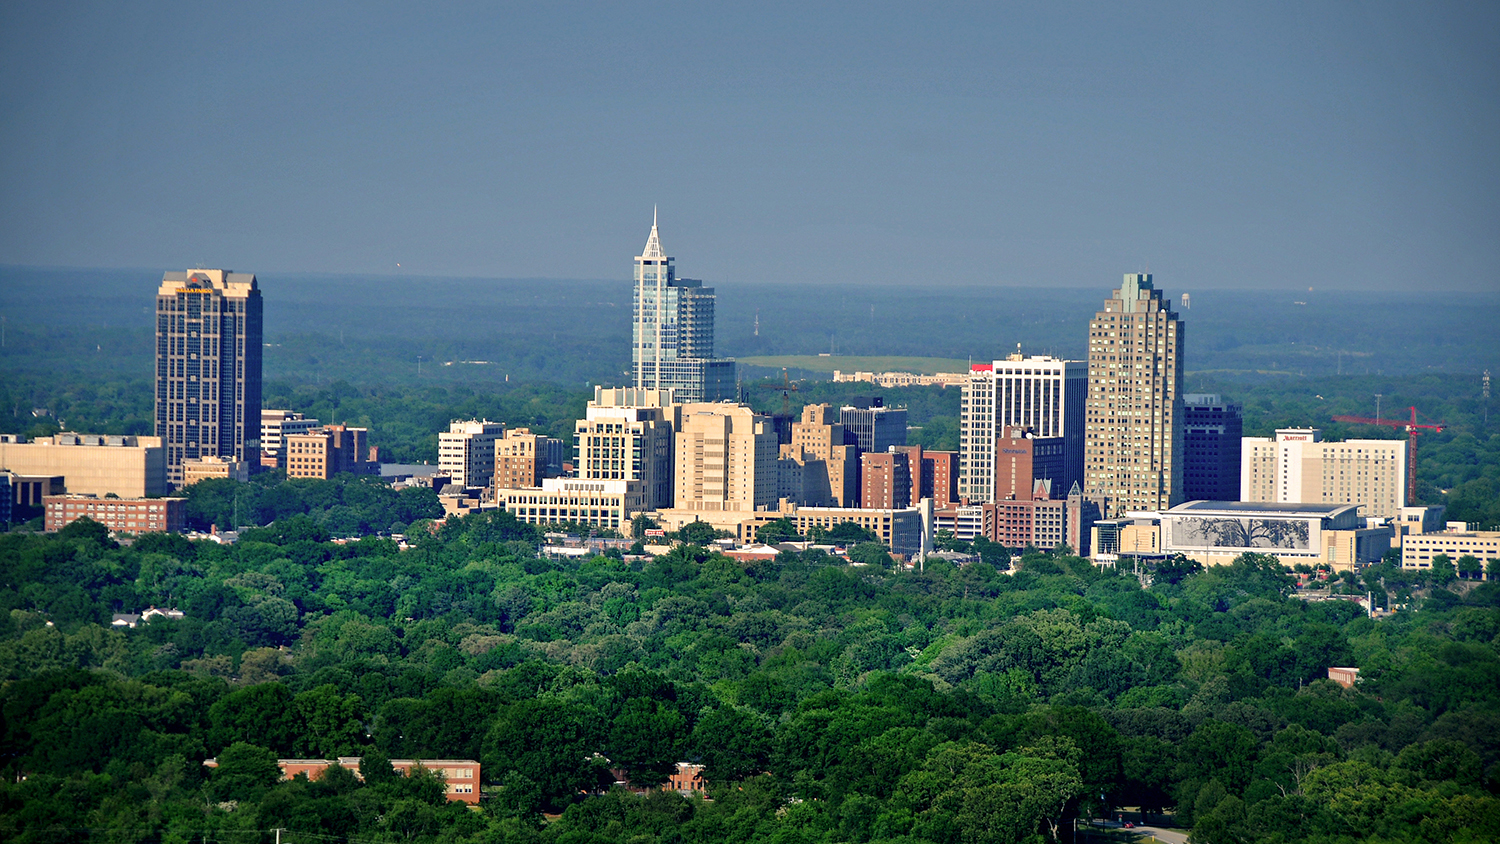 Aerial view of downtown Raleigh.